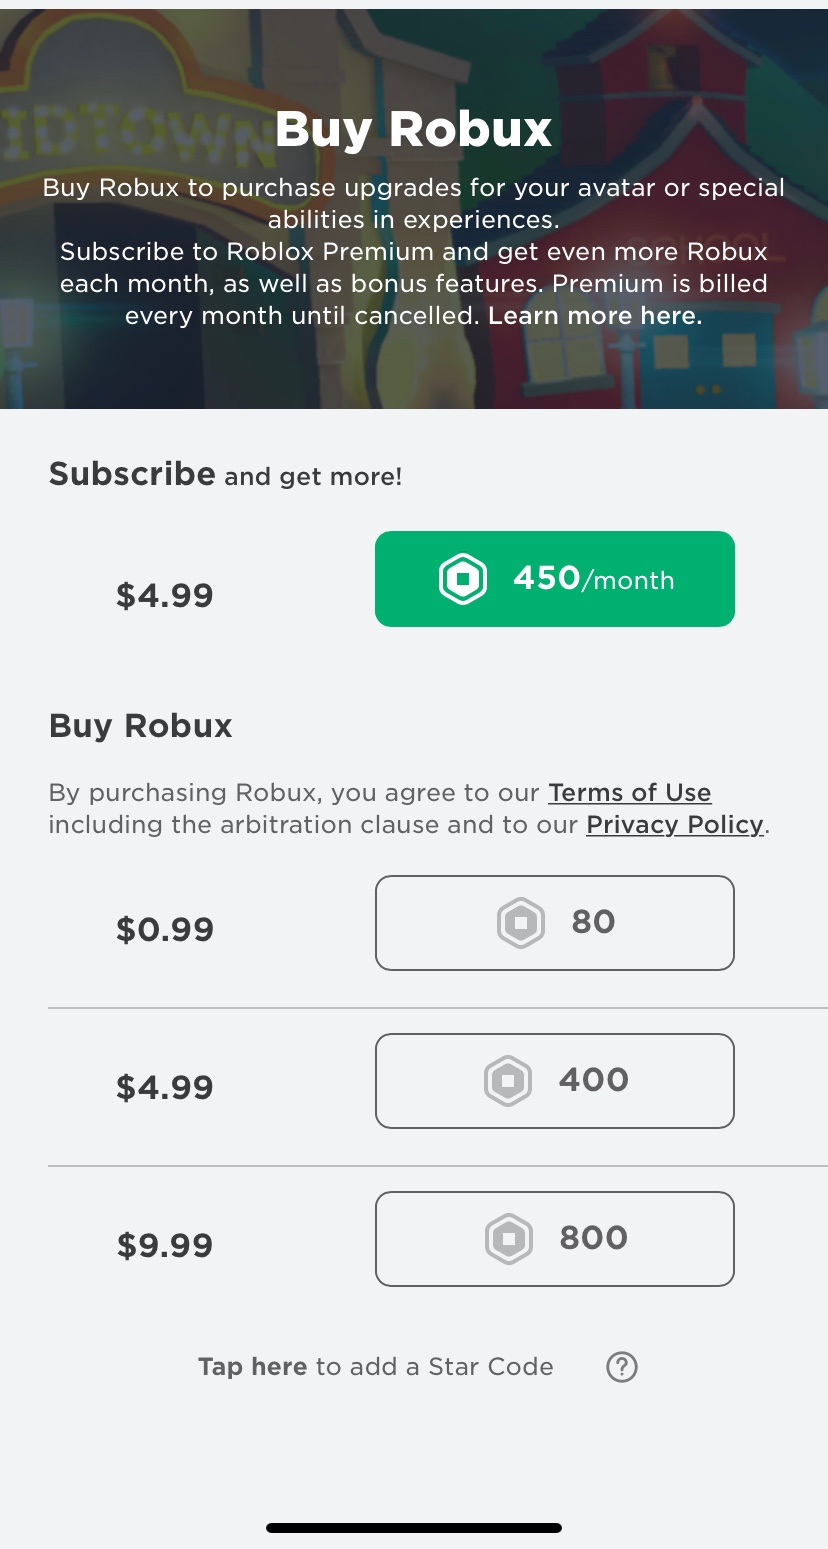 I can't purchase robux from game roblox - Apple Community